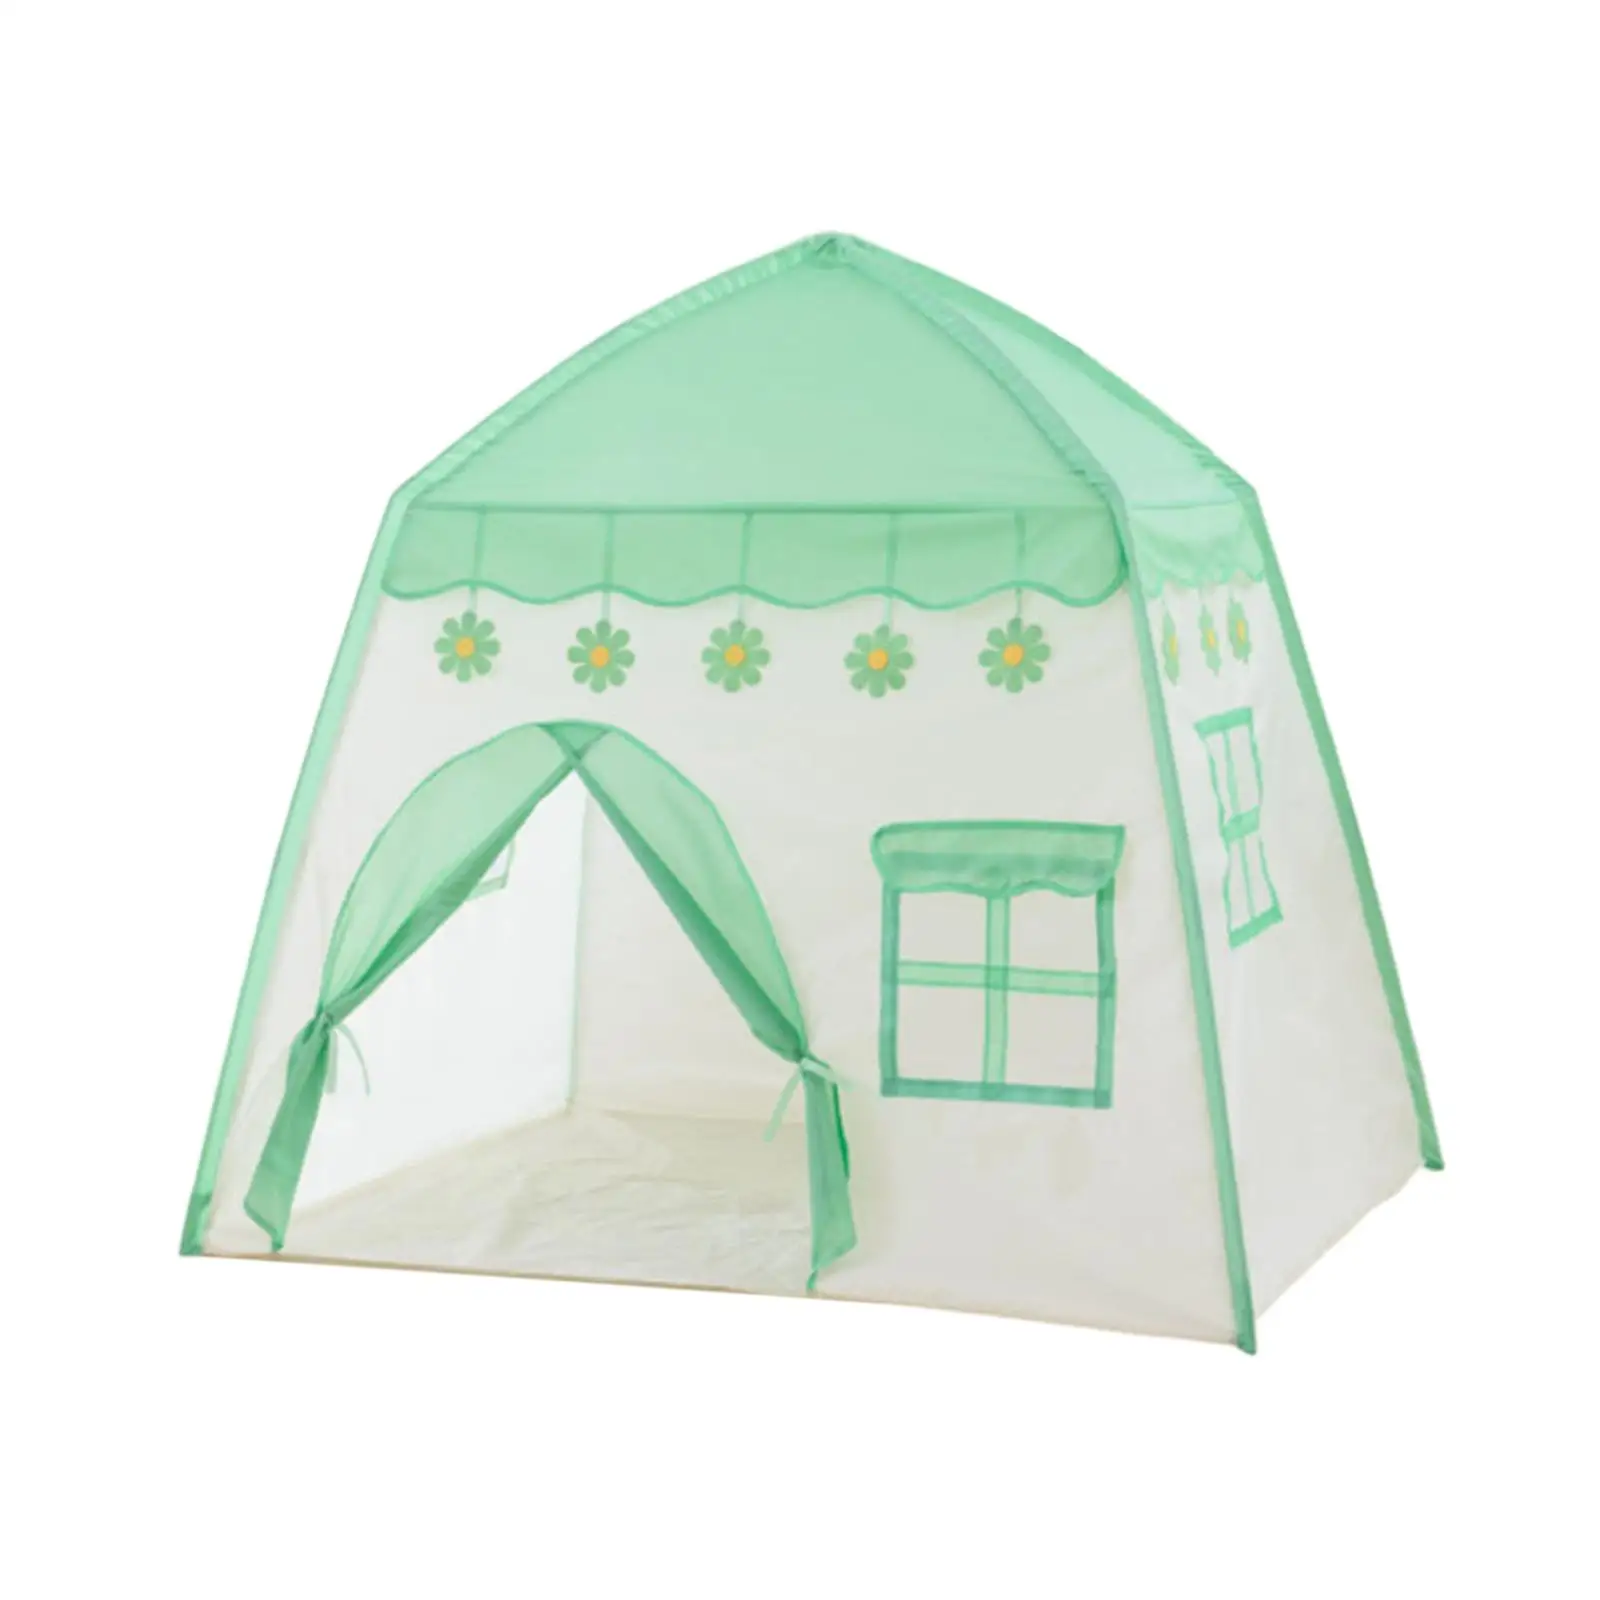 Cute Children Play Tent Fun Game Tent Multipurpose Outdoor Indoor Play Portable Role Play Game for Park Camping Outdoor Indoor